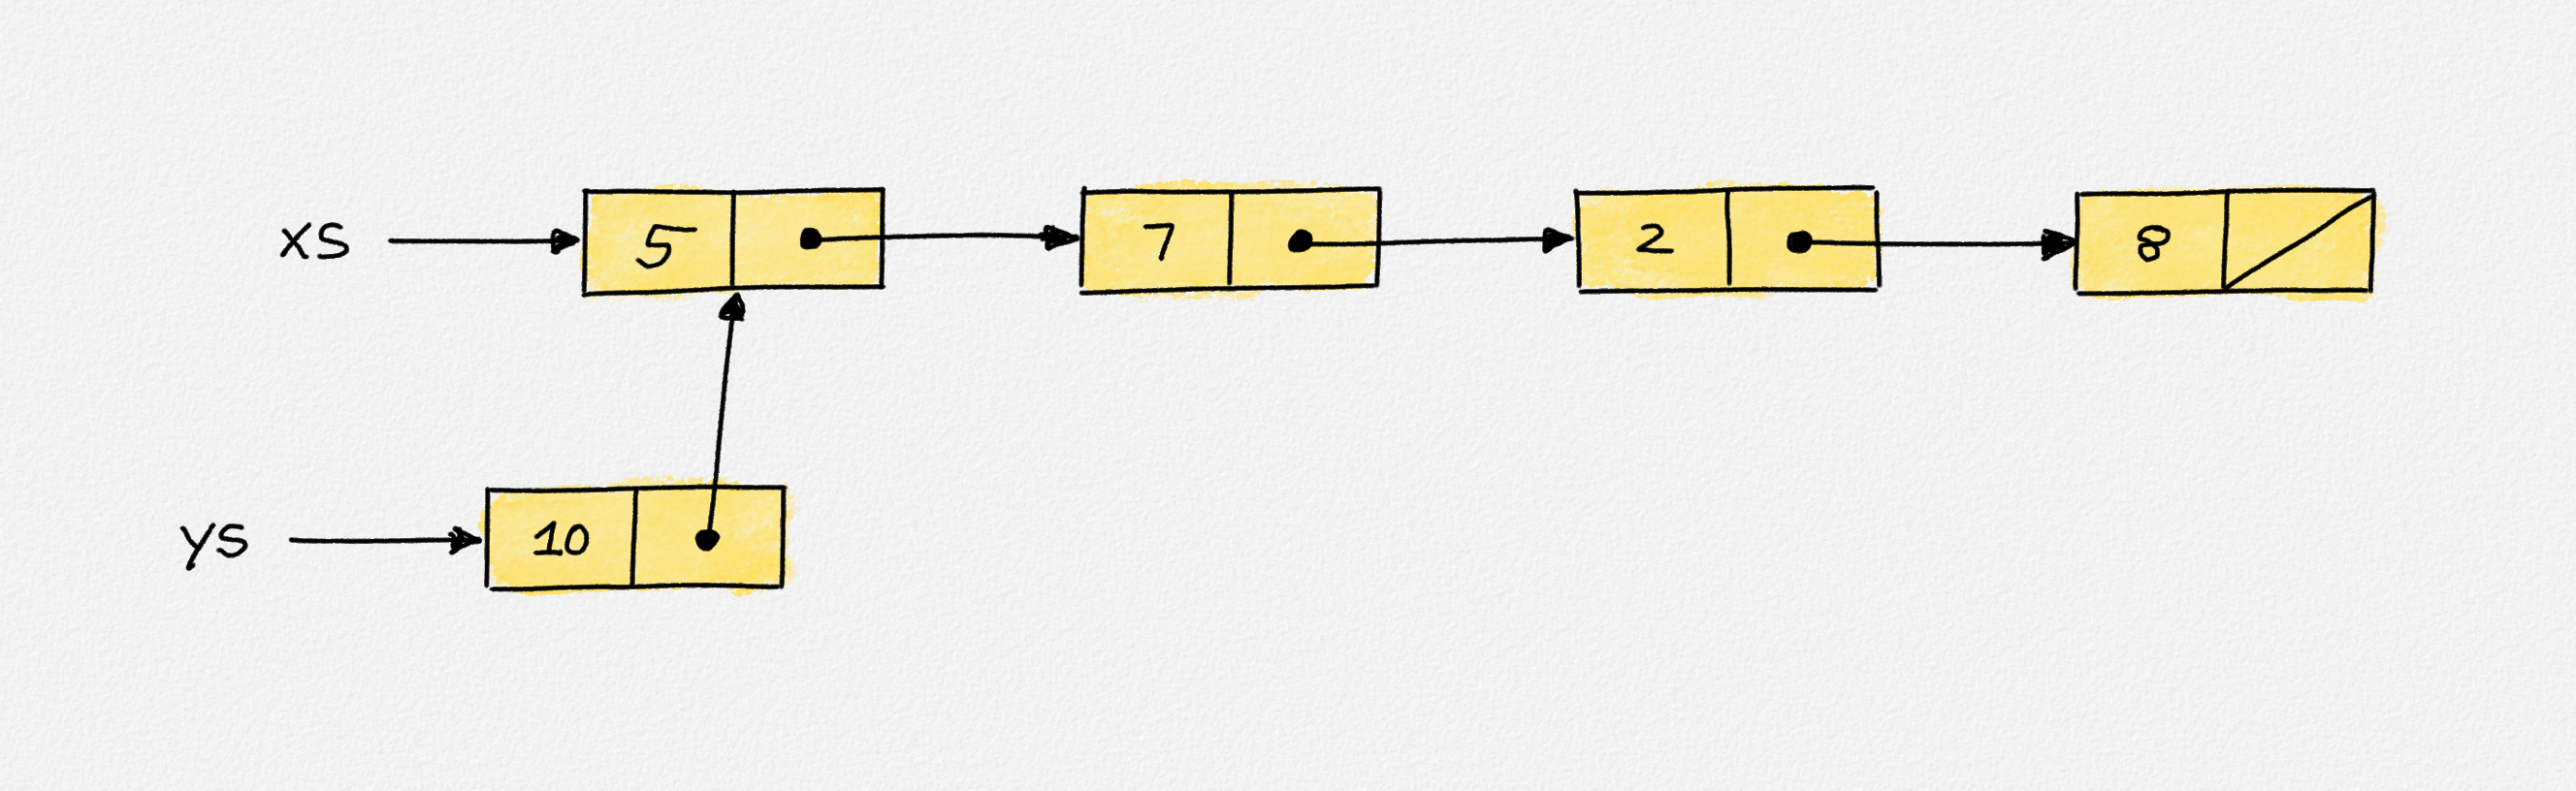 Illustration of two lists sharing nodes